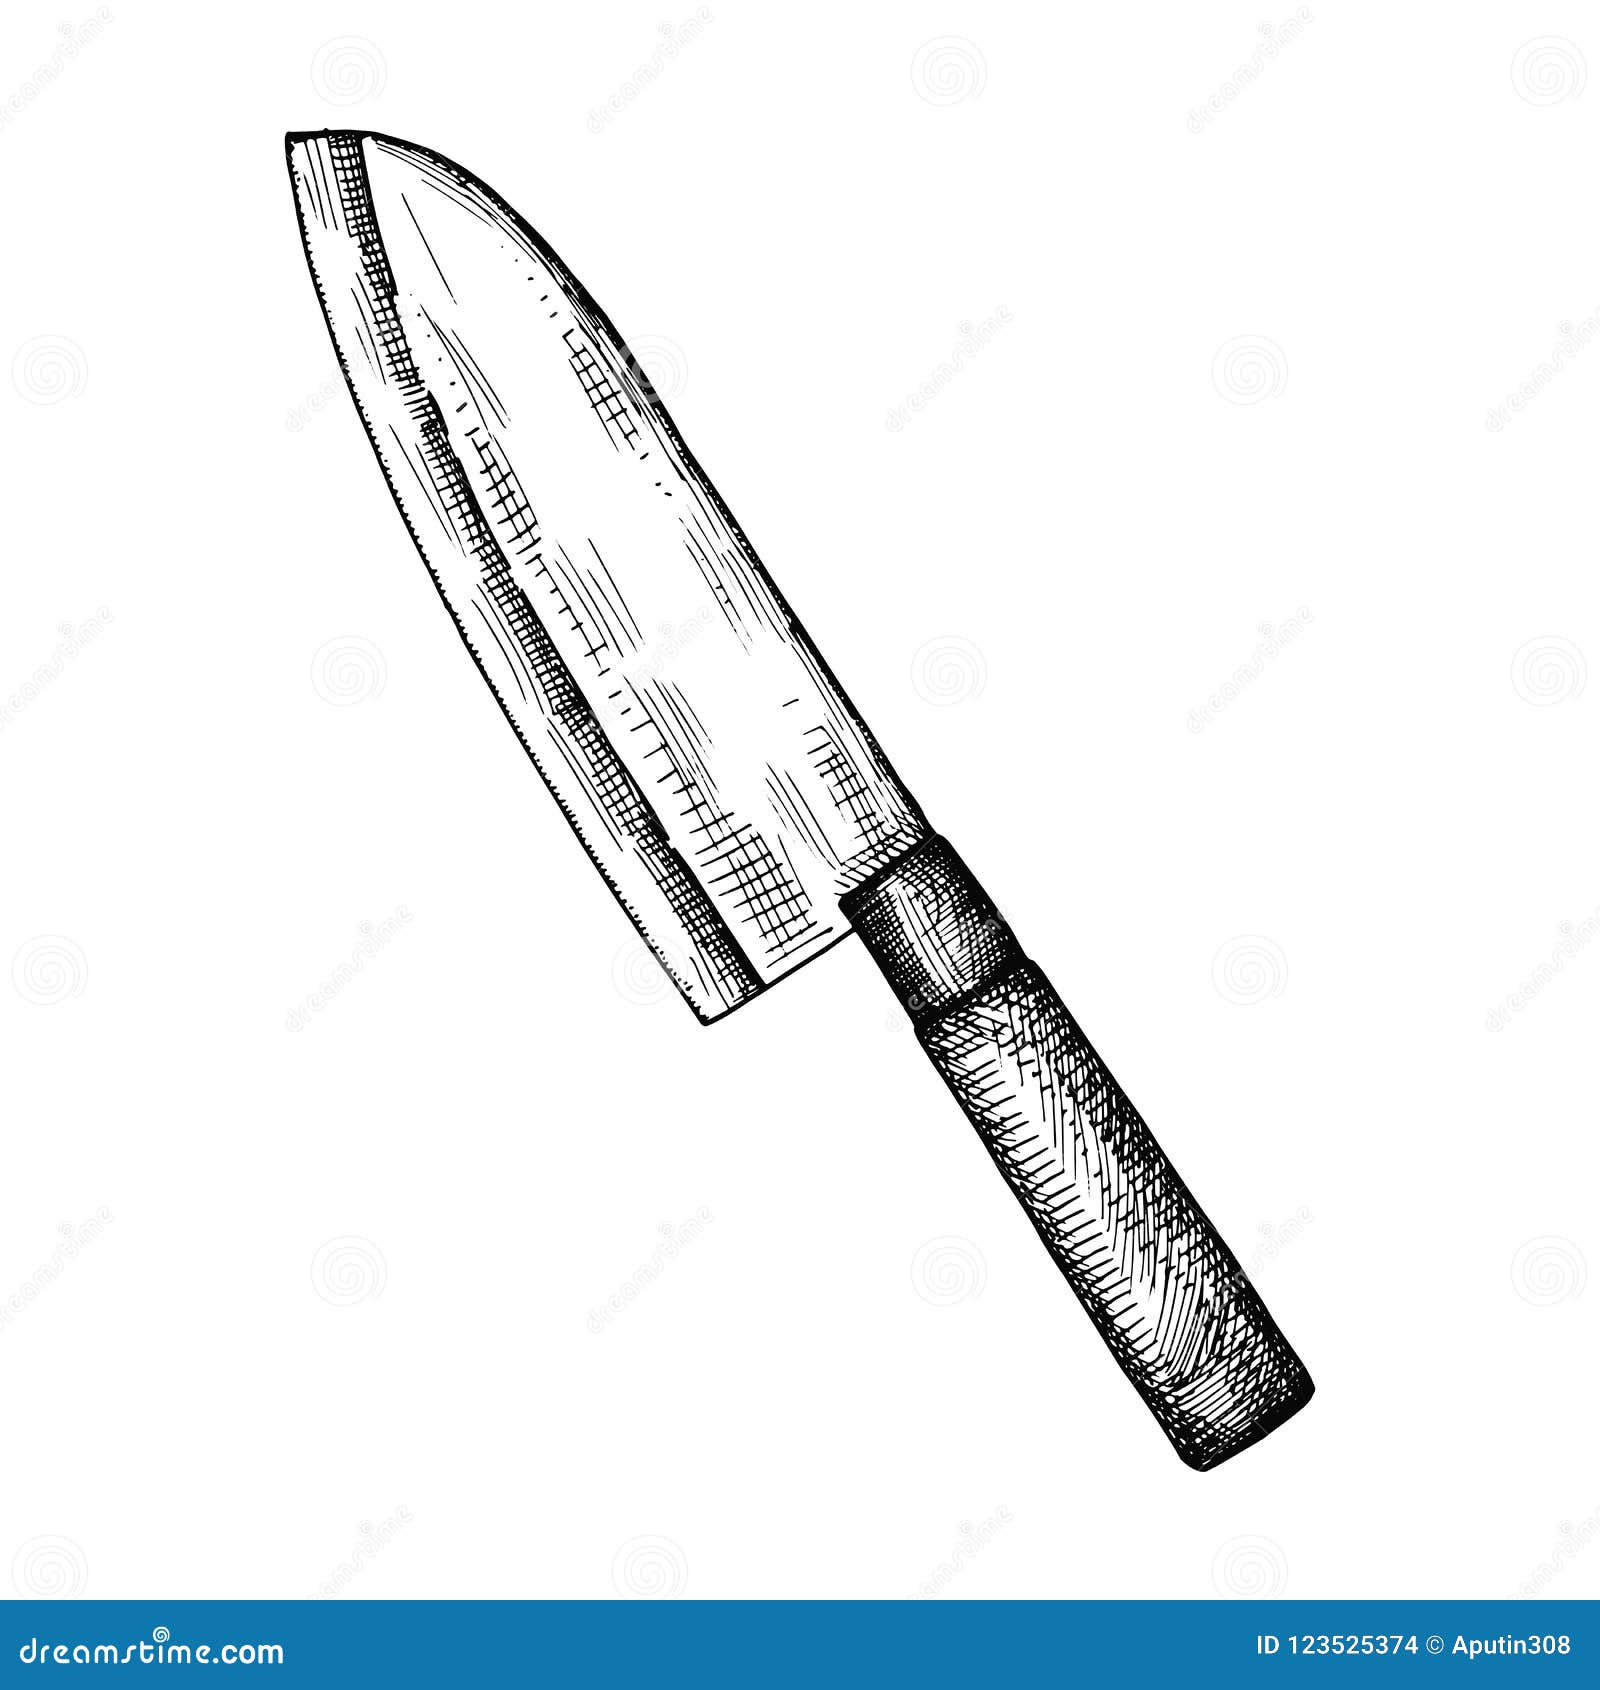 https://thumbs.dreamstime.com/z/big-kitchen-knife-silhouette-black-vector-isolated-object-big-kitchen-knife-silhouette-black-vector-isolated-object-123525374.jpg